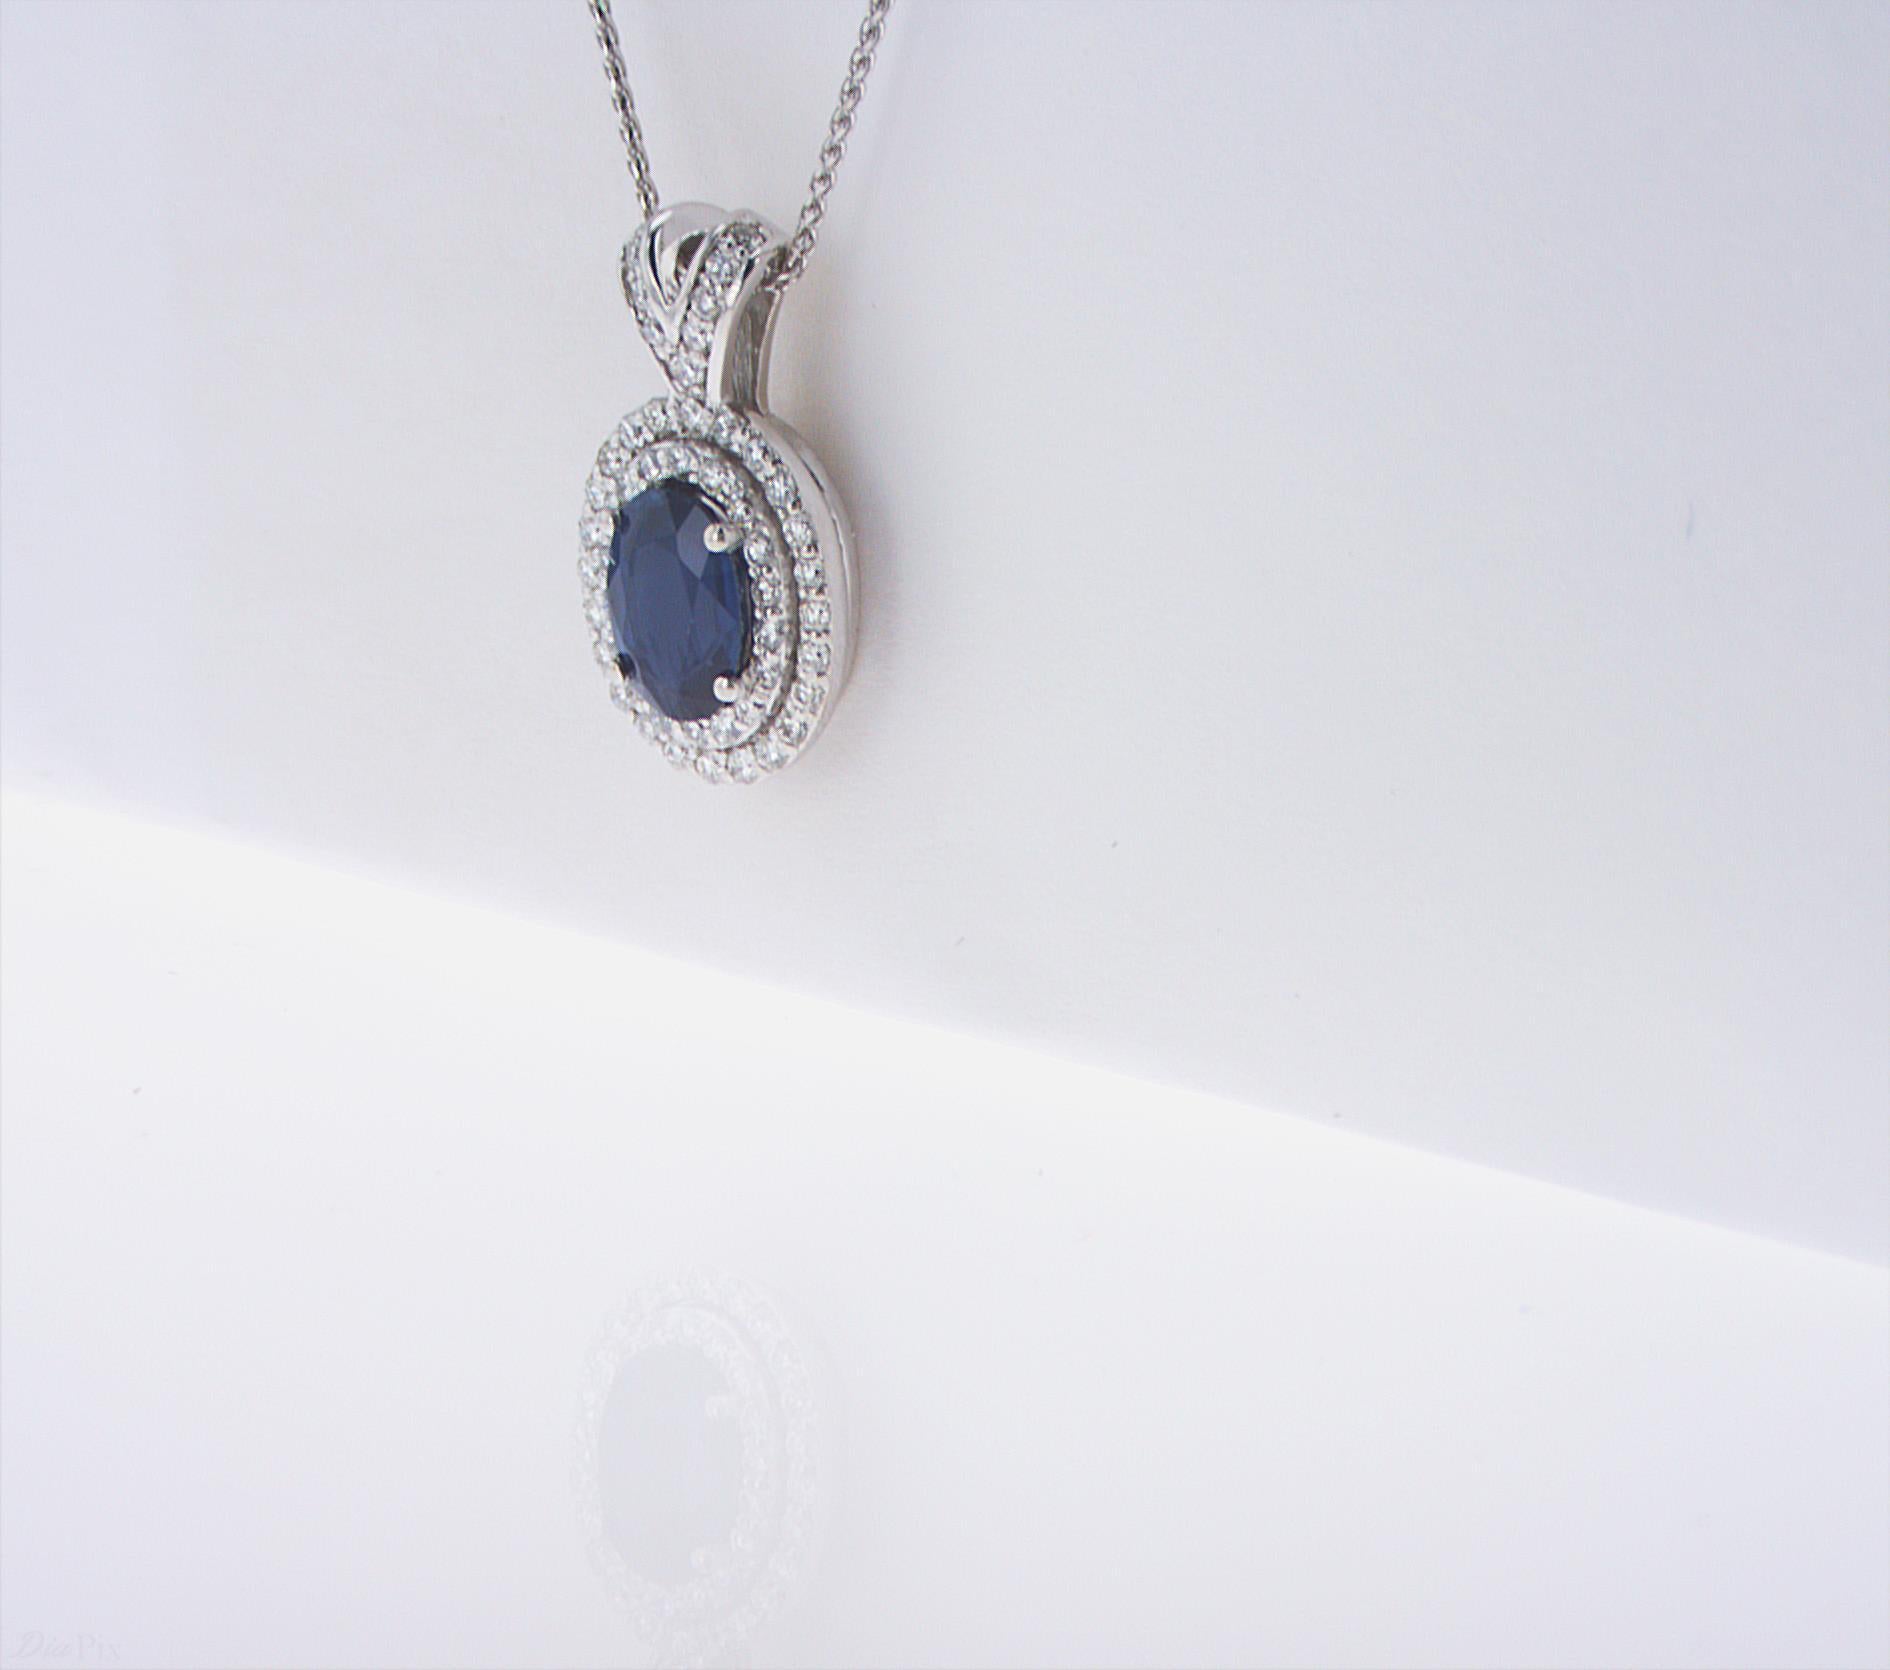 1.07ct Oval Sapphire with 2 rows of Diamond Halo, 0.28ct total weight. 14k White Gold.